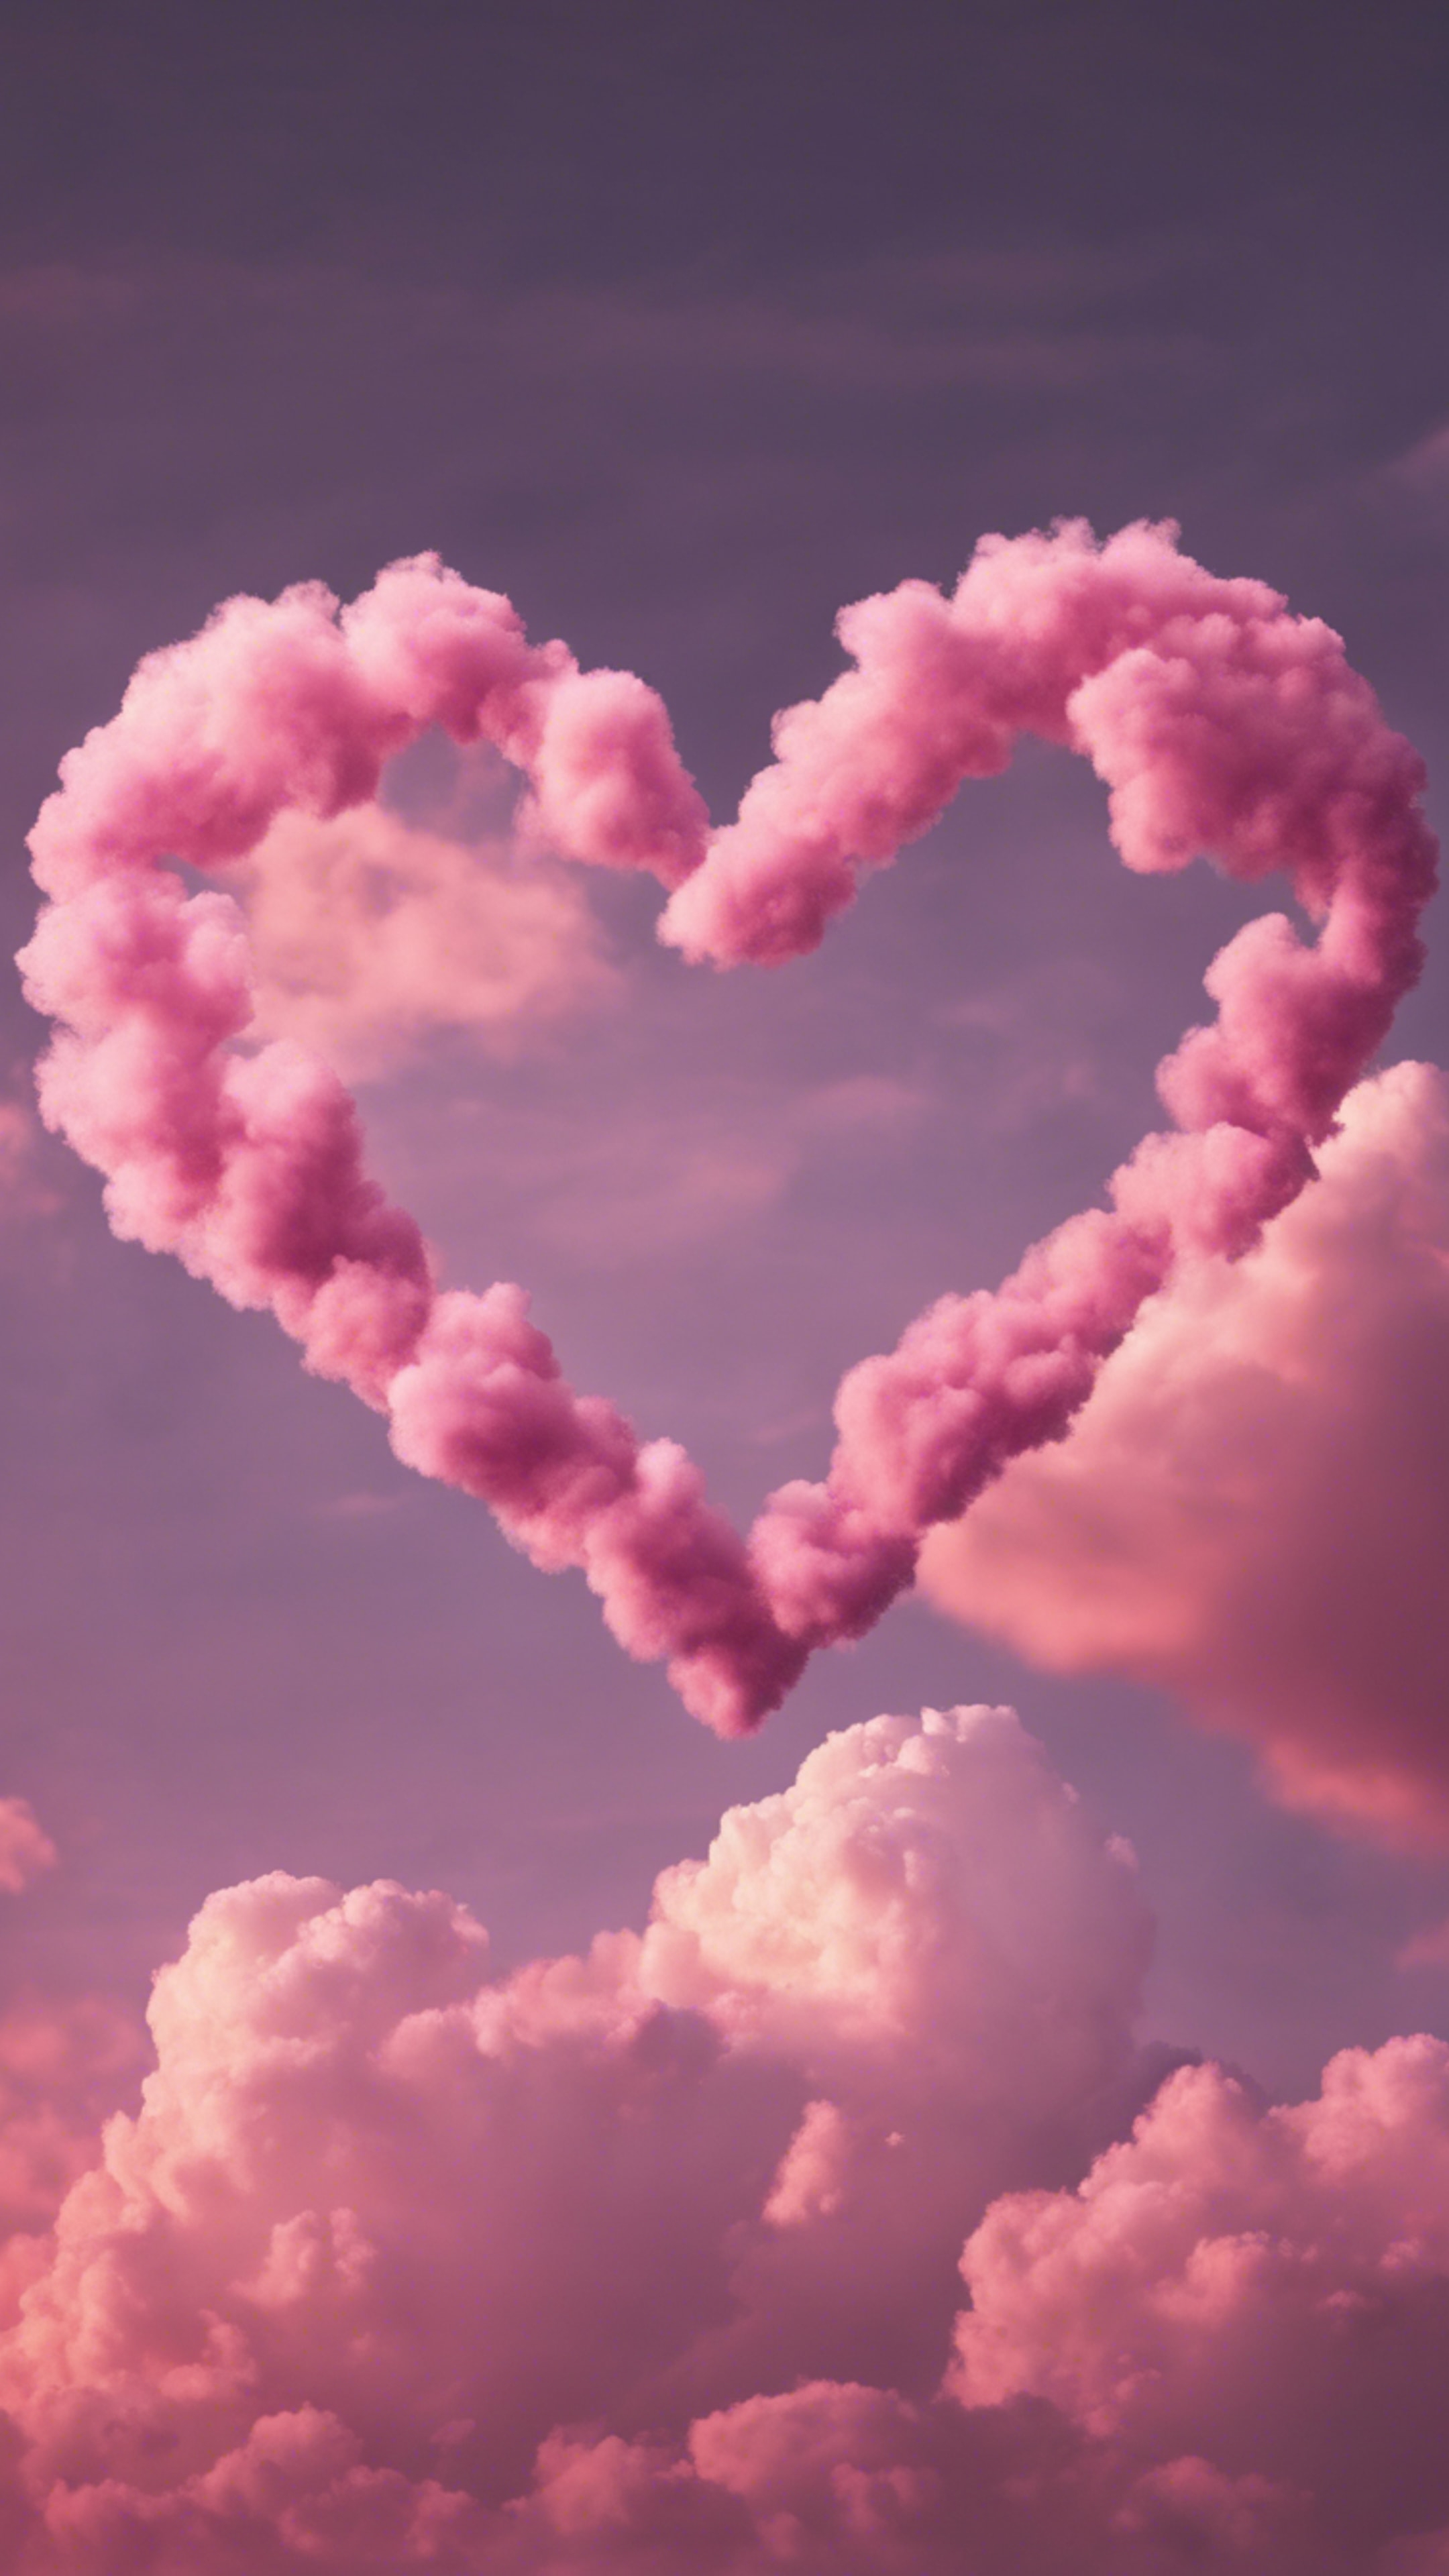 Pink heart-shaped clouds floating in the twilight sky. Wallpaper[eb6690dc48484c9aa4c9]